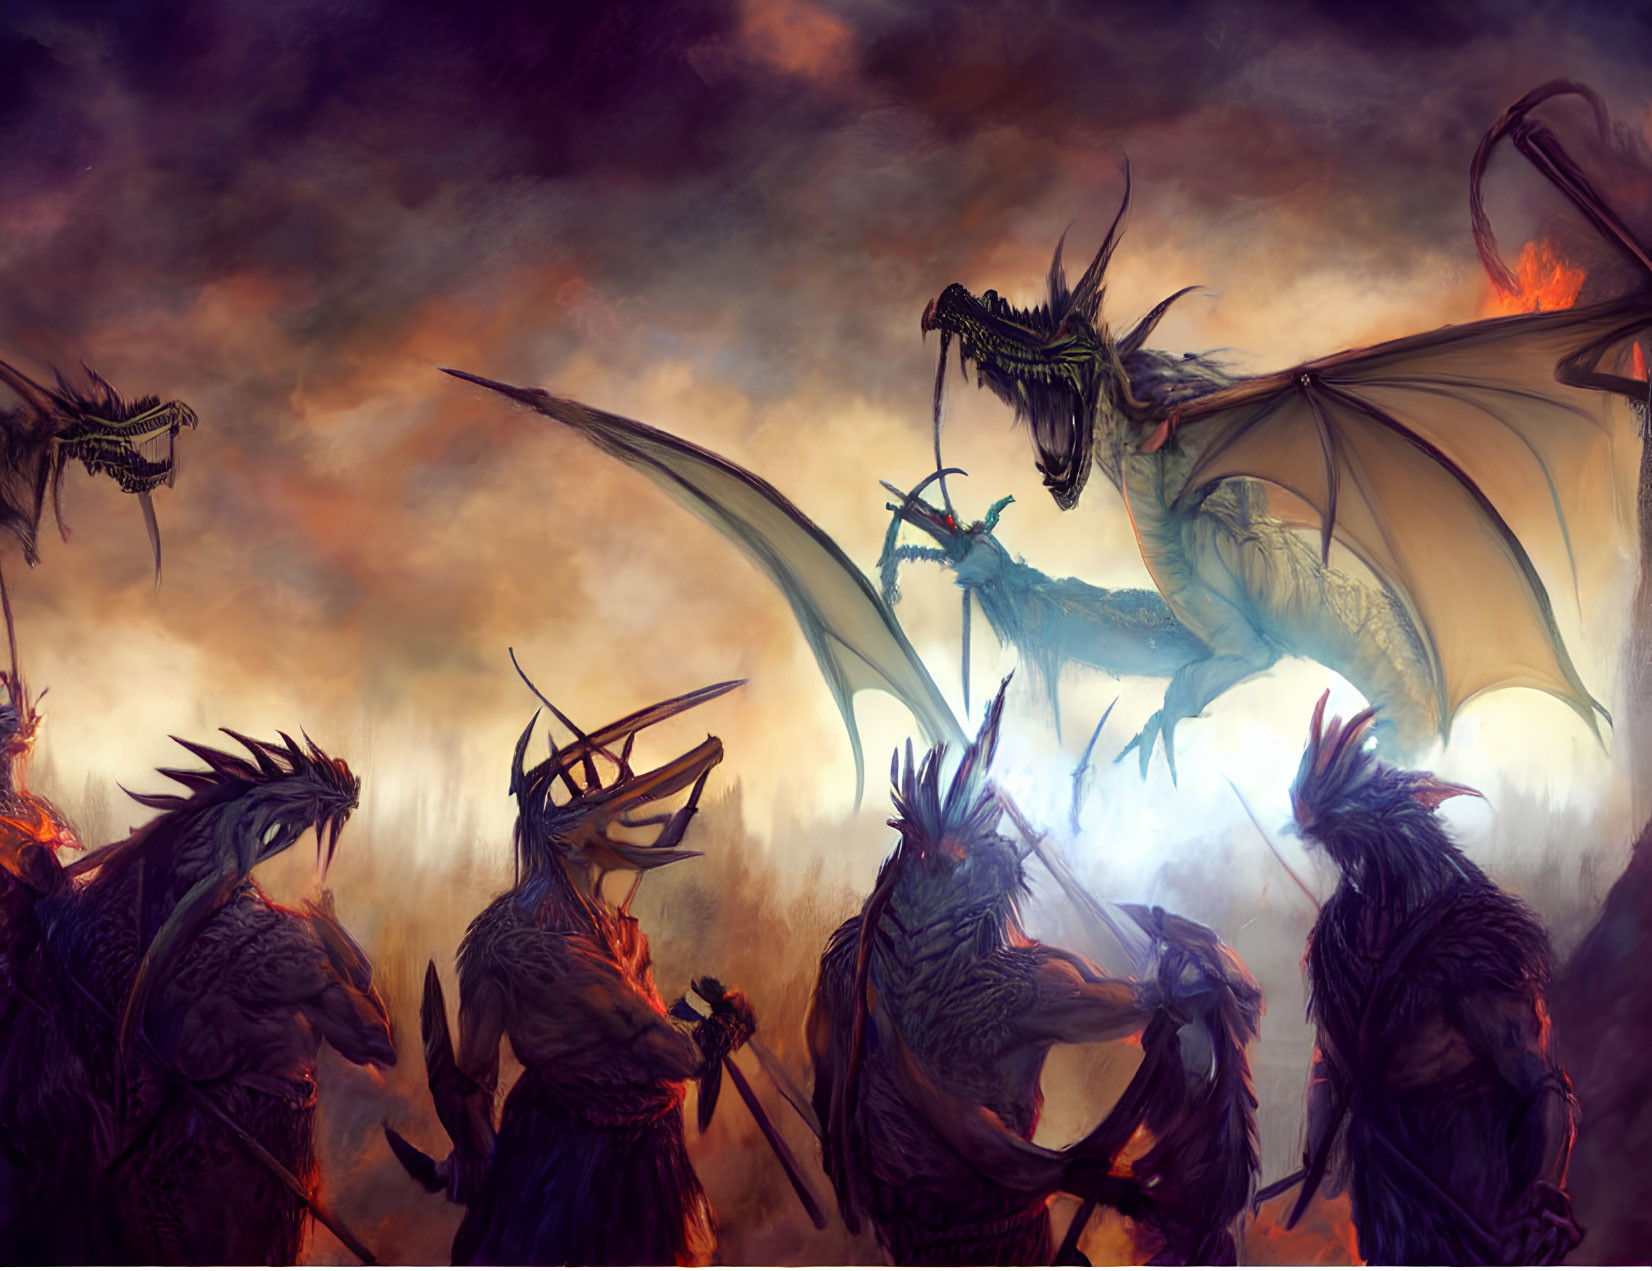 Fearsome dragons in epic fantasy scene with fiery sky